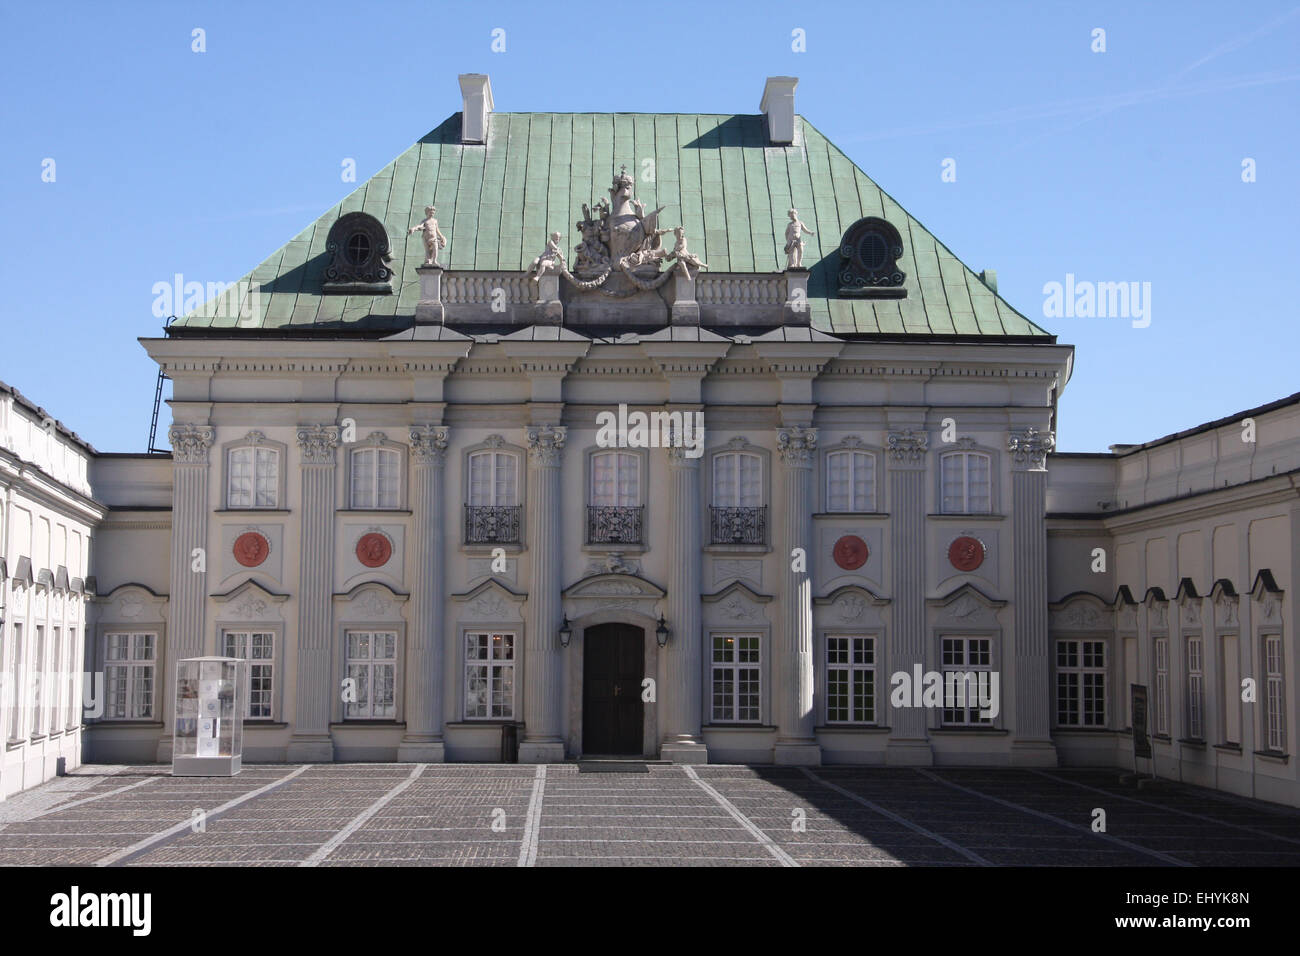 Poland, Warsaw, Europe, palace, copper roof, baroque, Blache, copper roof palace, Old Town, place, Stock Photo